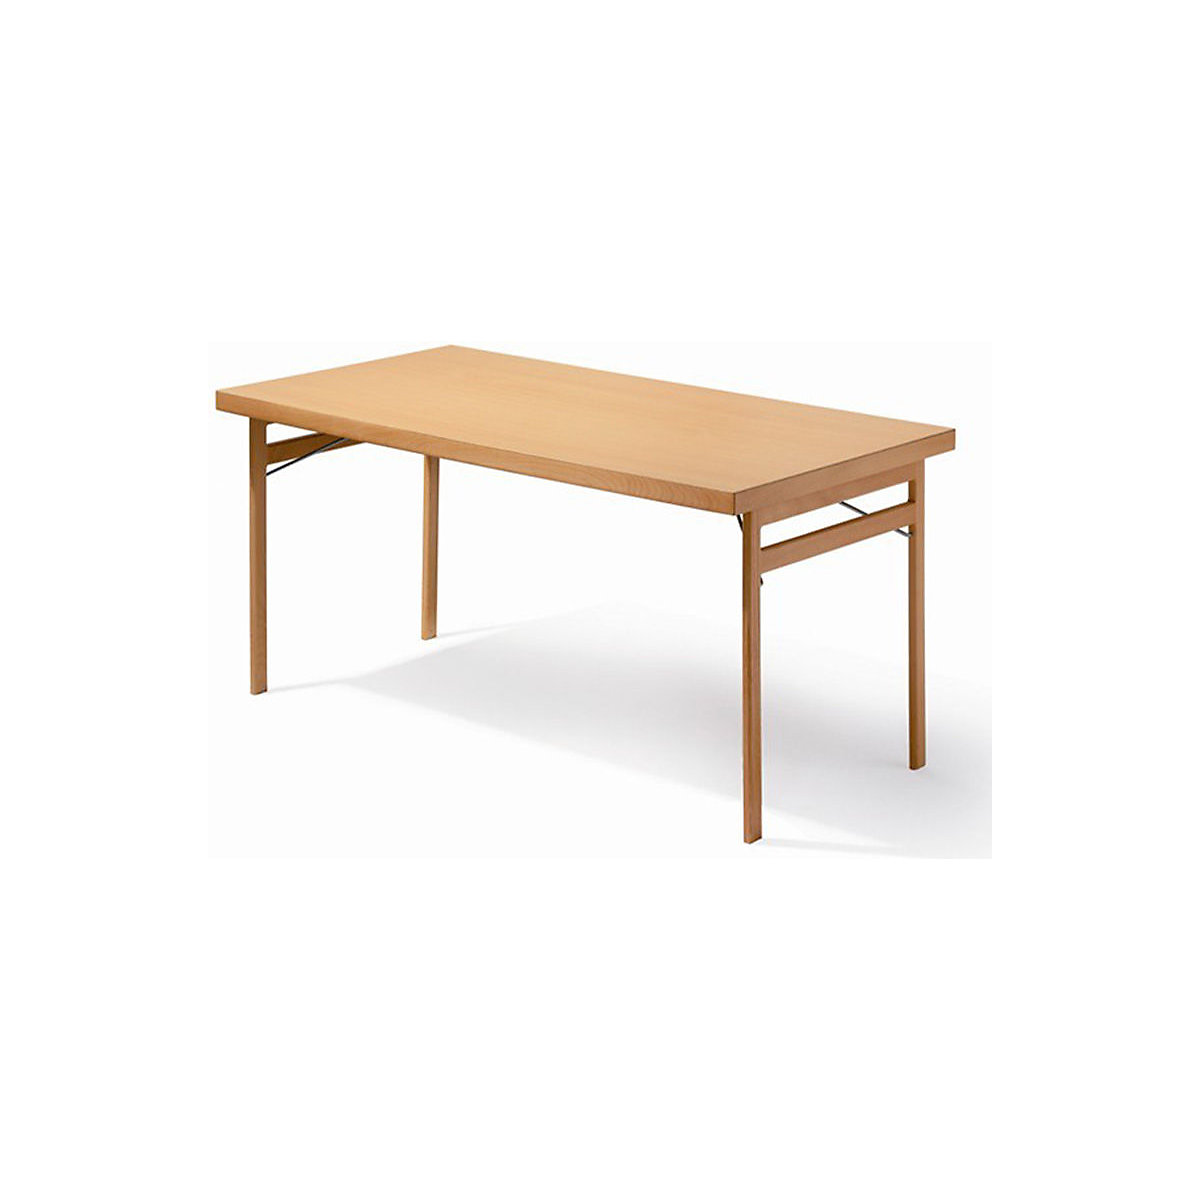 Folding table, solid wood frame, beech, WxD 1800 x 800 mm, laminate tabletop-1